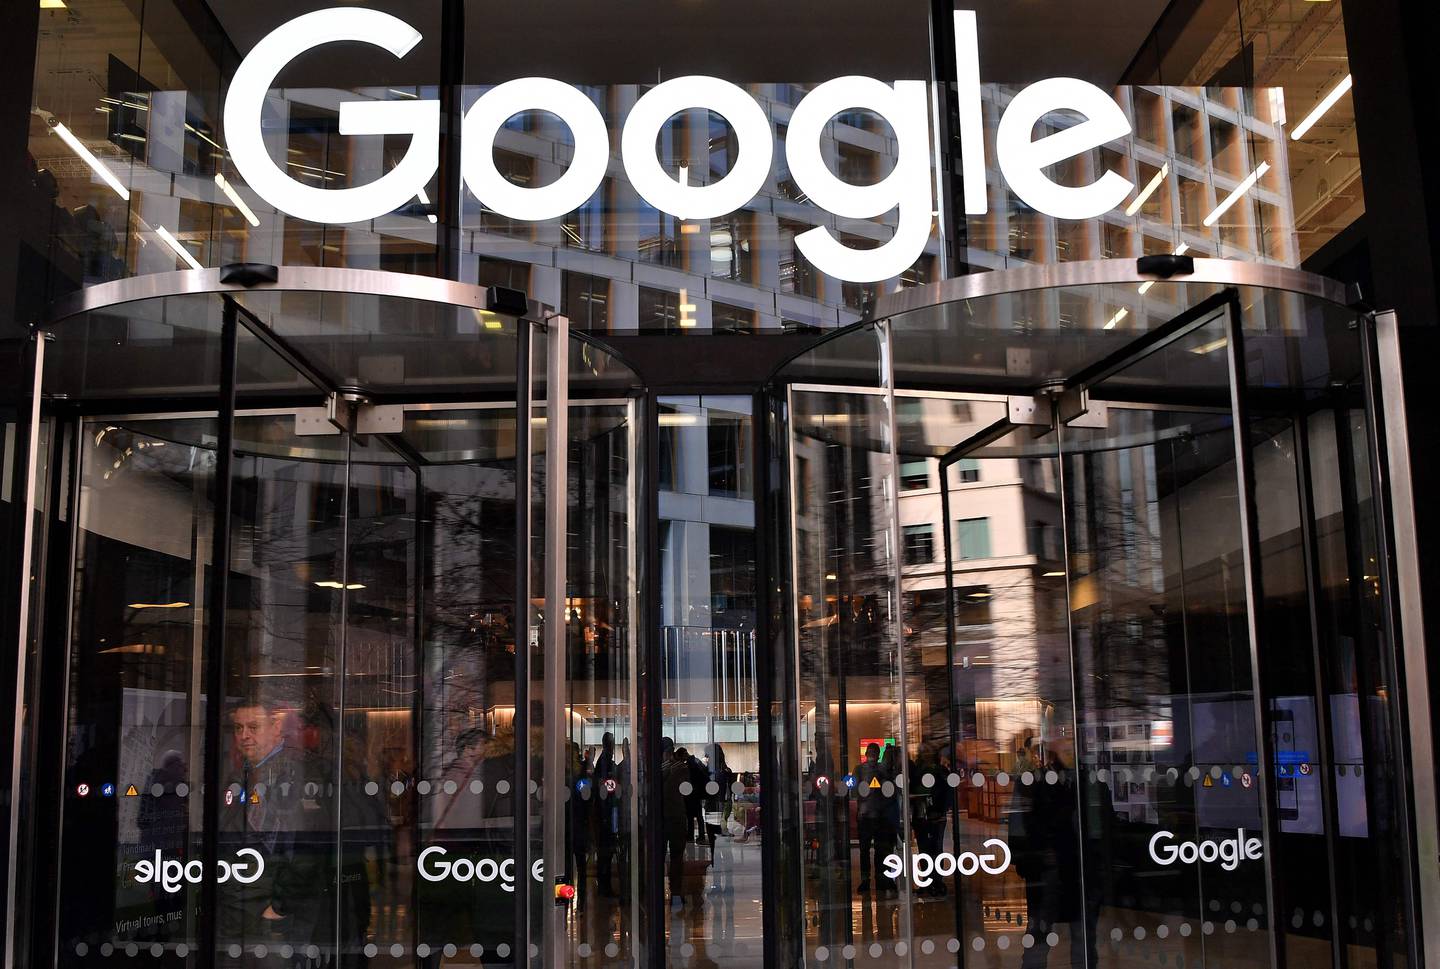 Canadian print media will receive $75 million in Google media payments